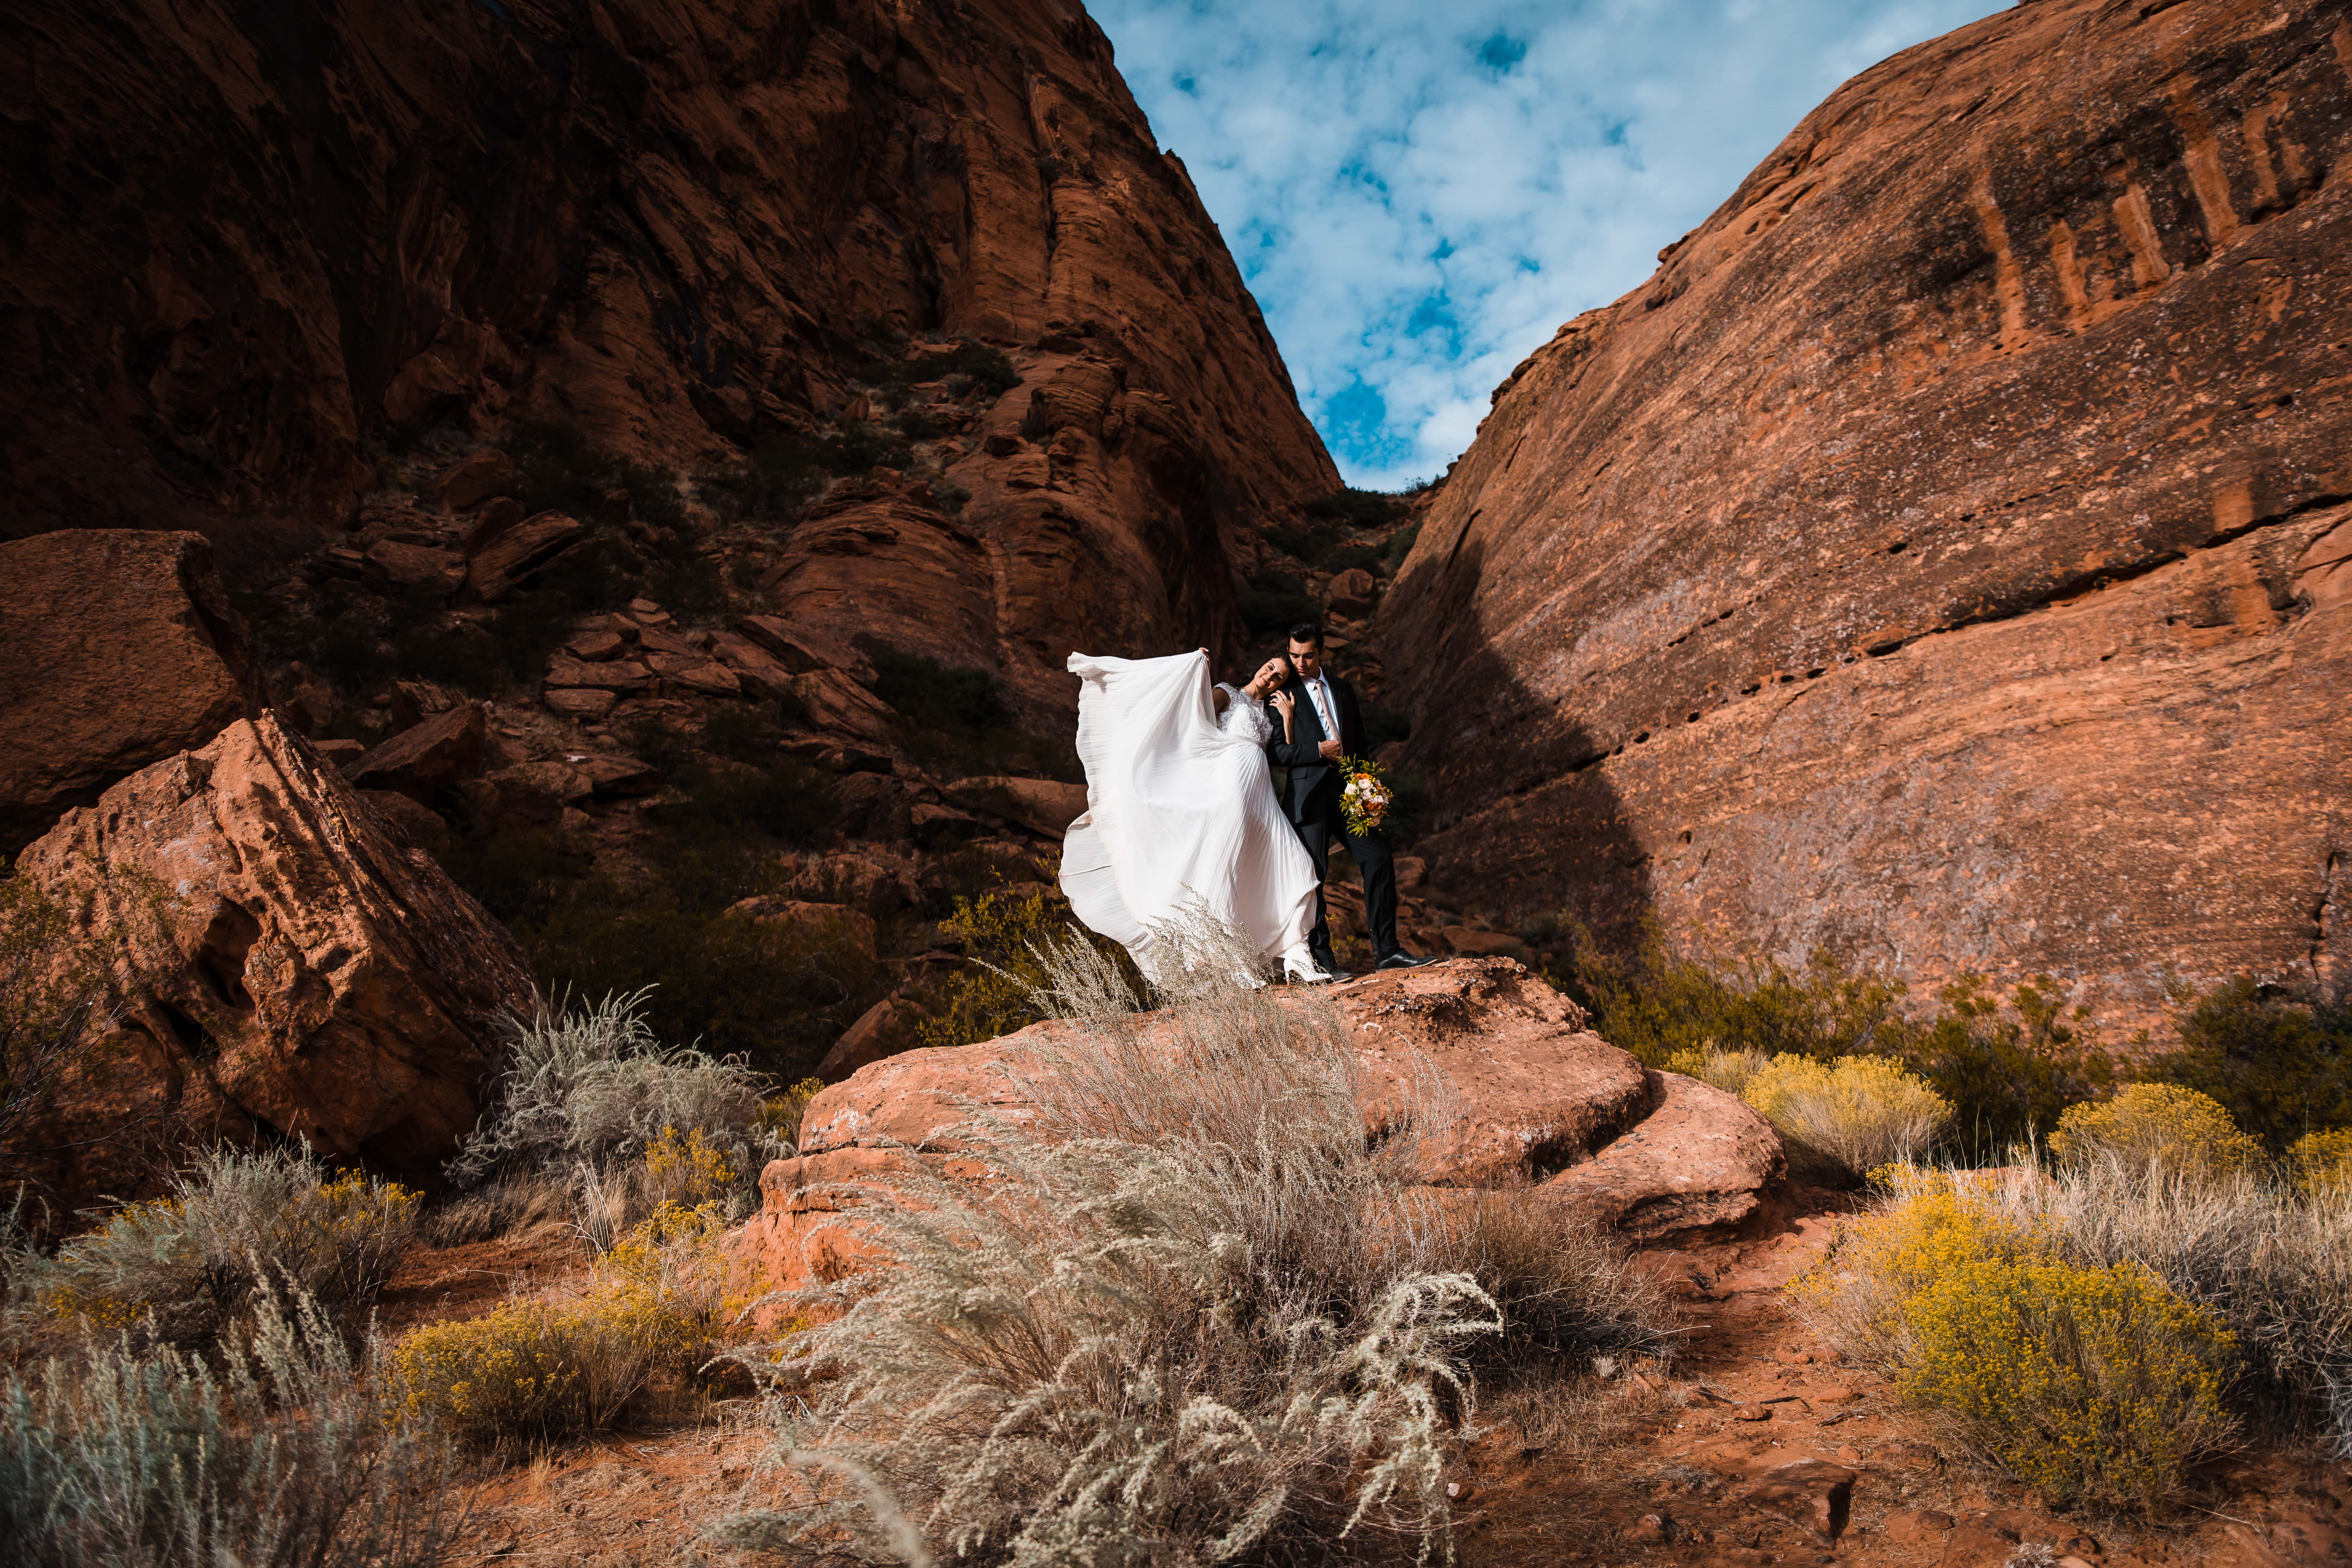 Posing in Utah's red rocks, a couple poses after their elopement